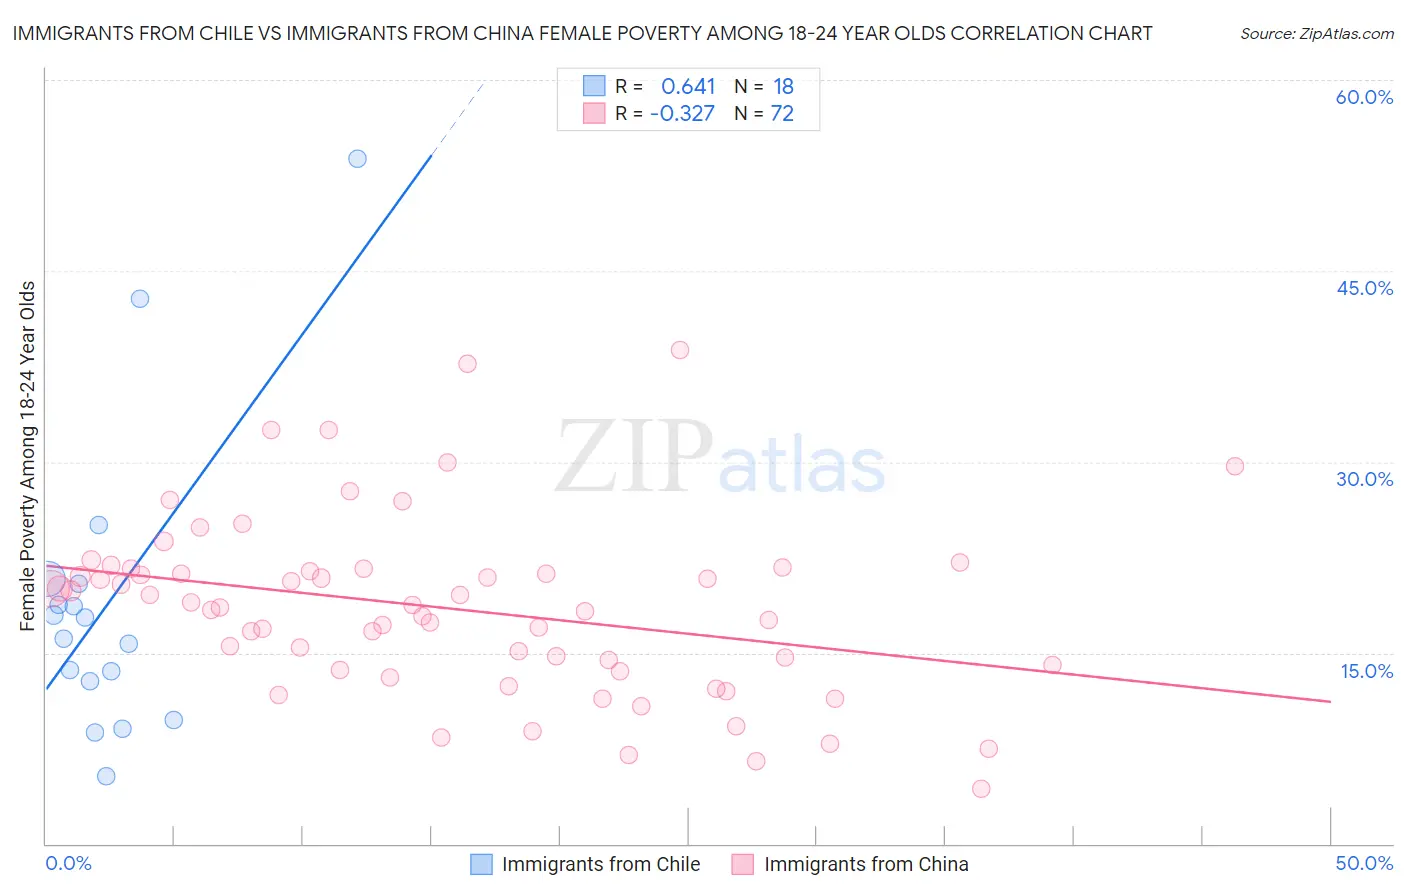 Immigrants from Chile vs Immigrants from China Female Poverty Among 18-24 Year Olds